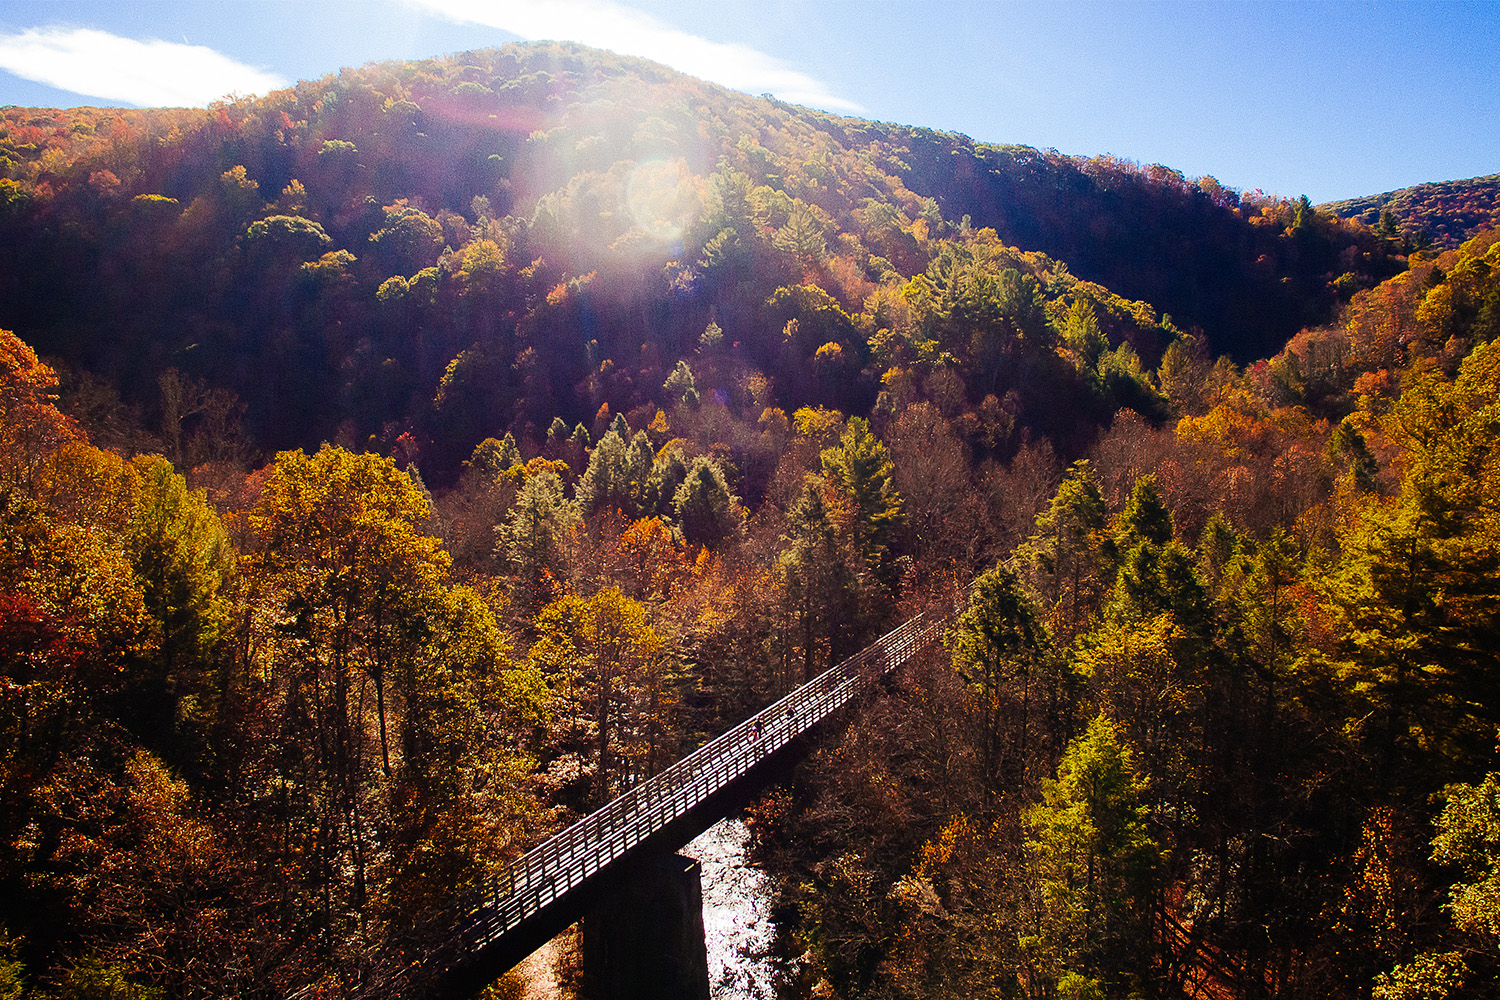 Virginia's Creeper Trail has some hidden food gems, if you're willing to make some pit stops.